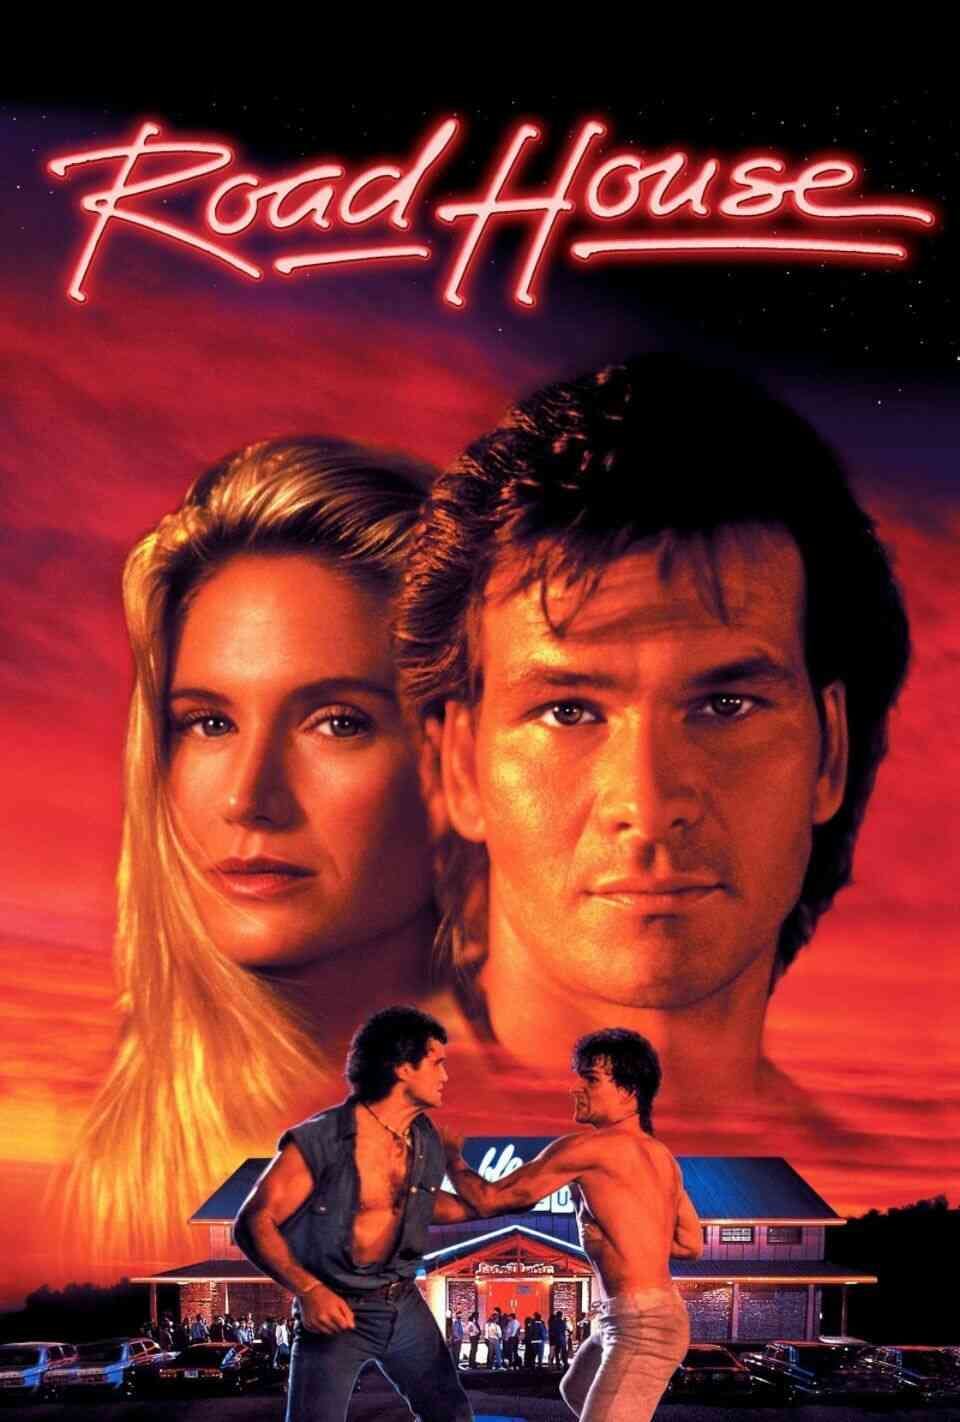 Read Road House screenplay (poster)